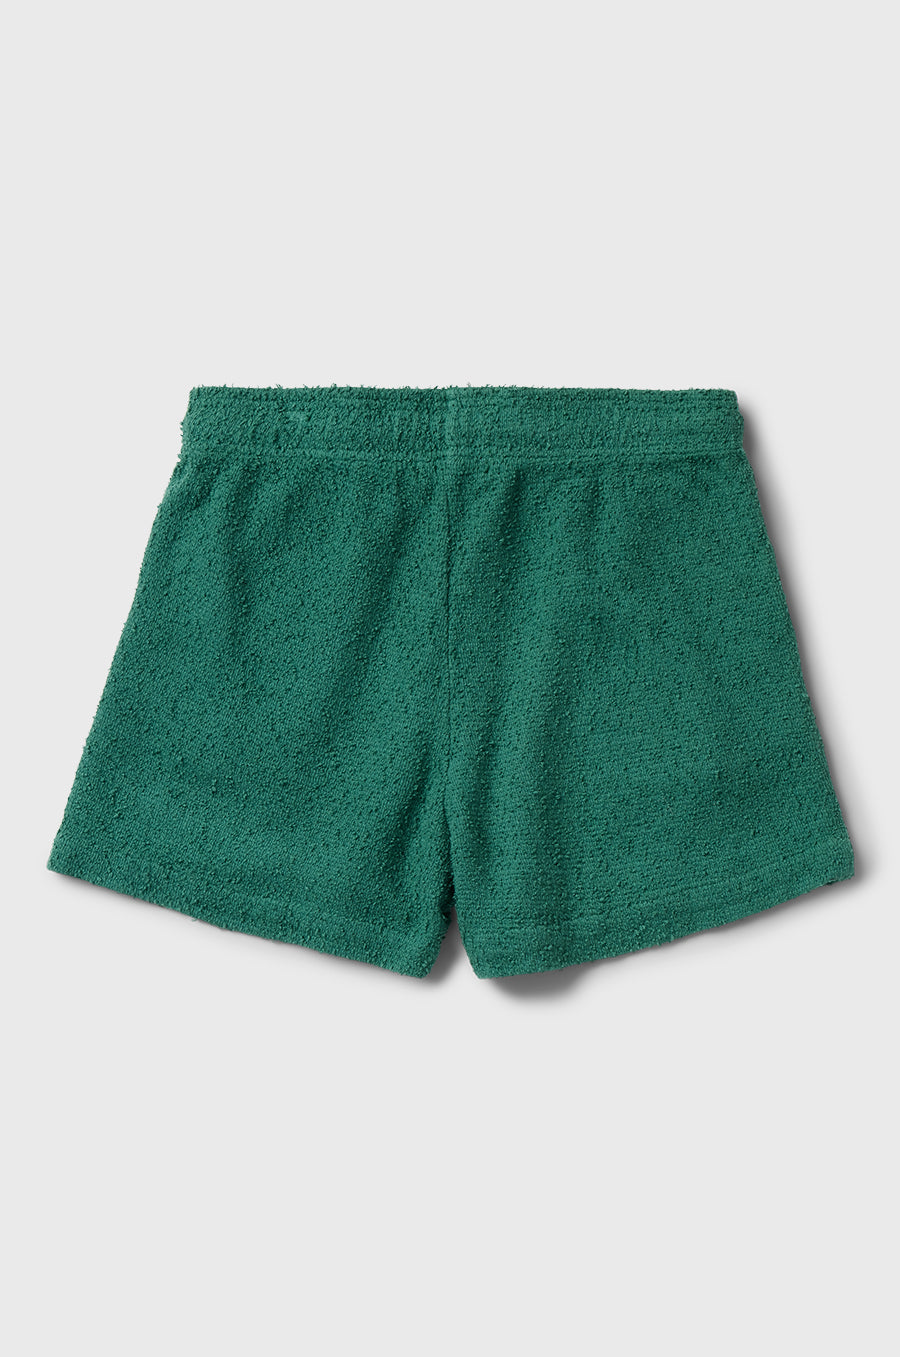 the lady & the sailor Weekend Short in Sage Boucle.